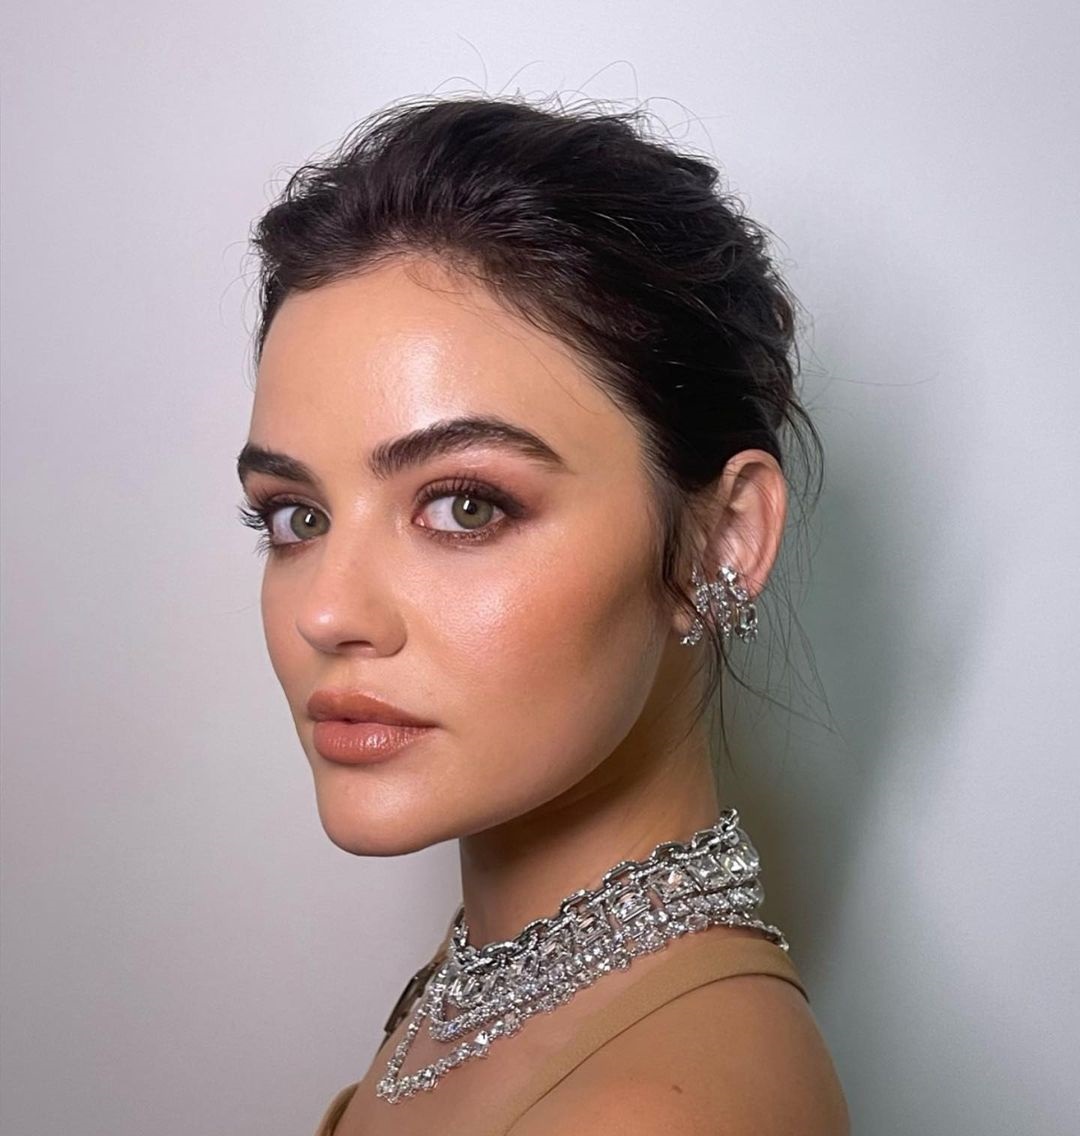 Lucy hale 40 hottest pics, lucy hale 40 instagram